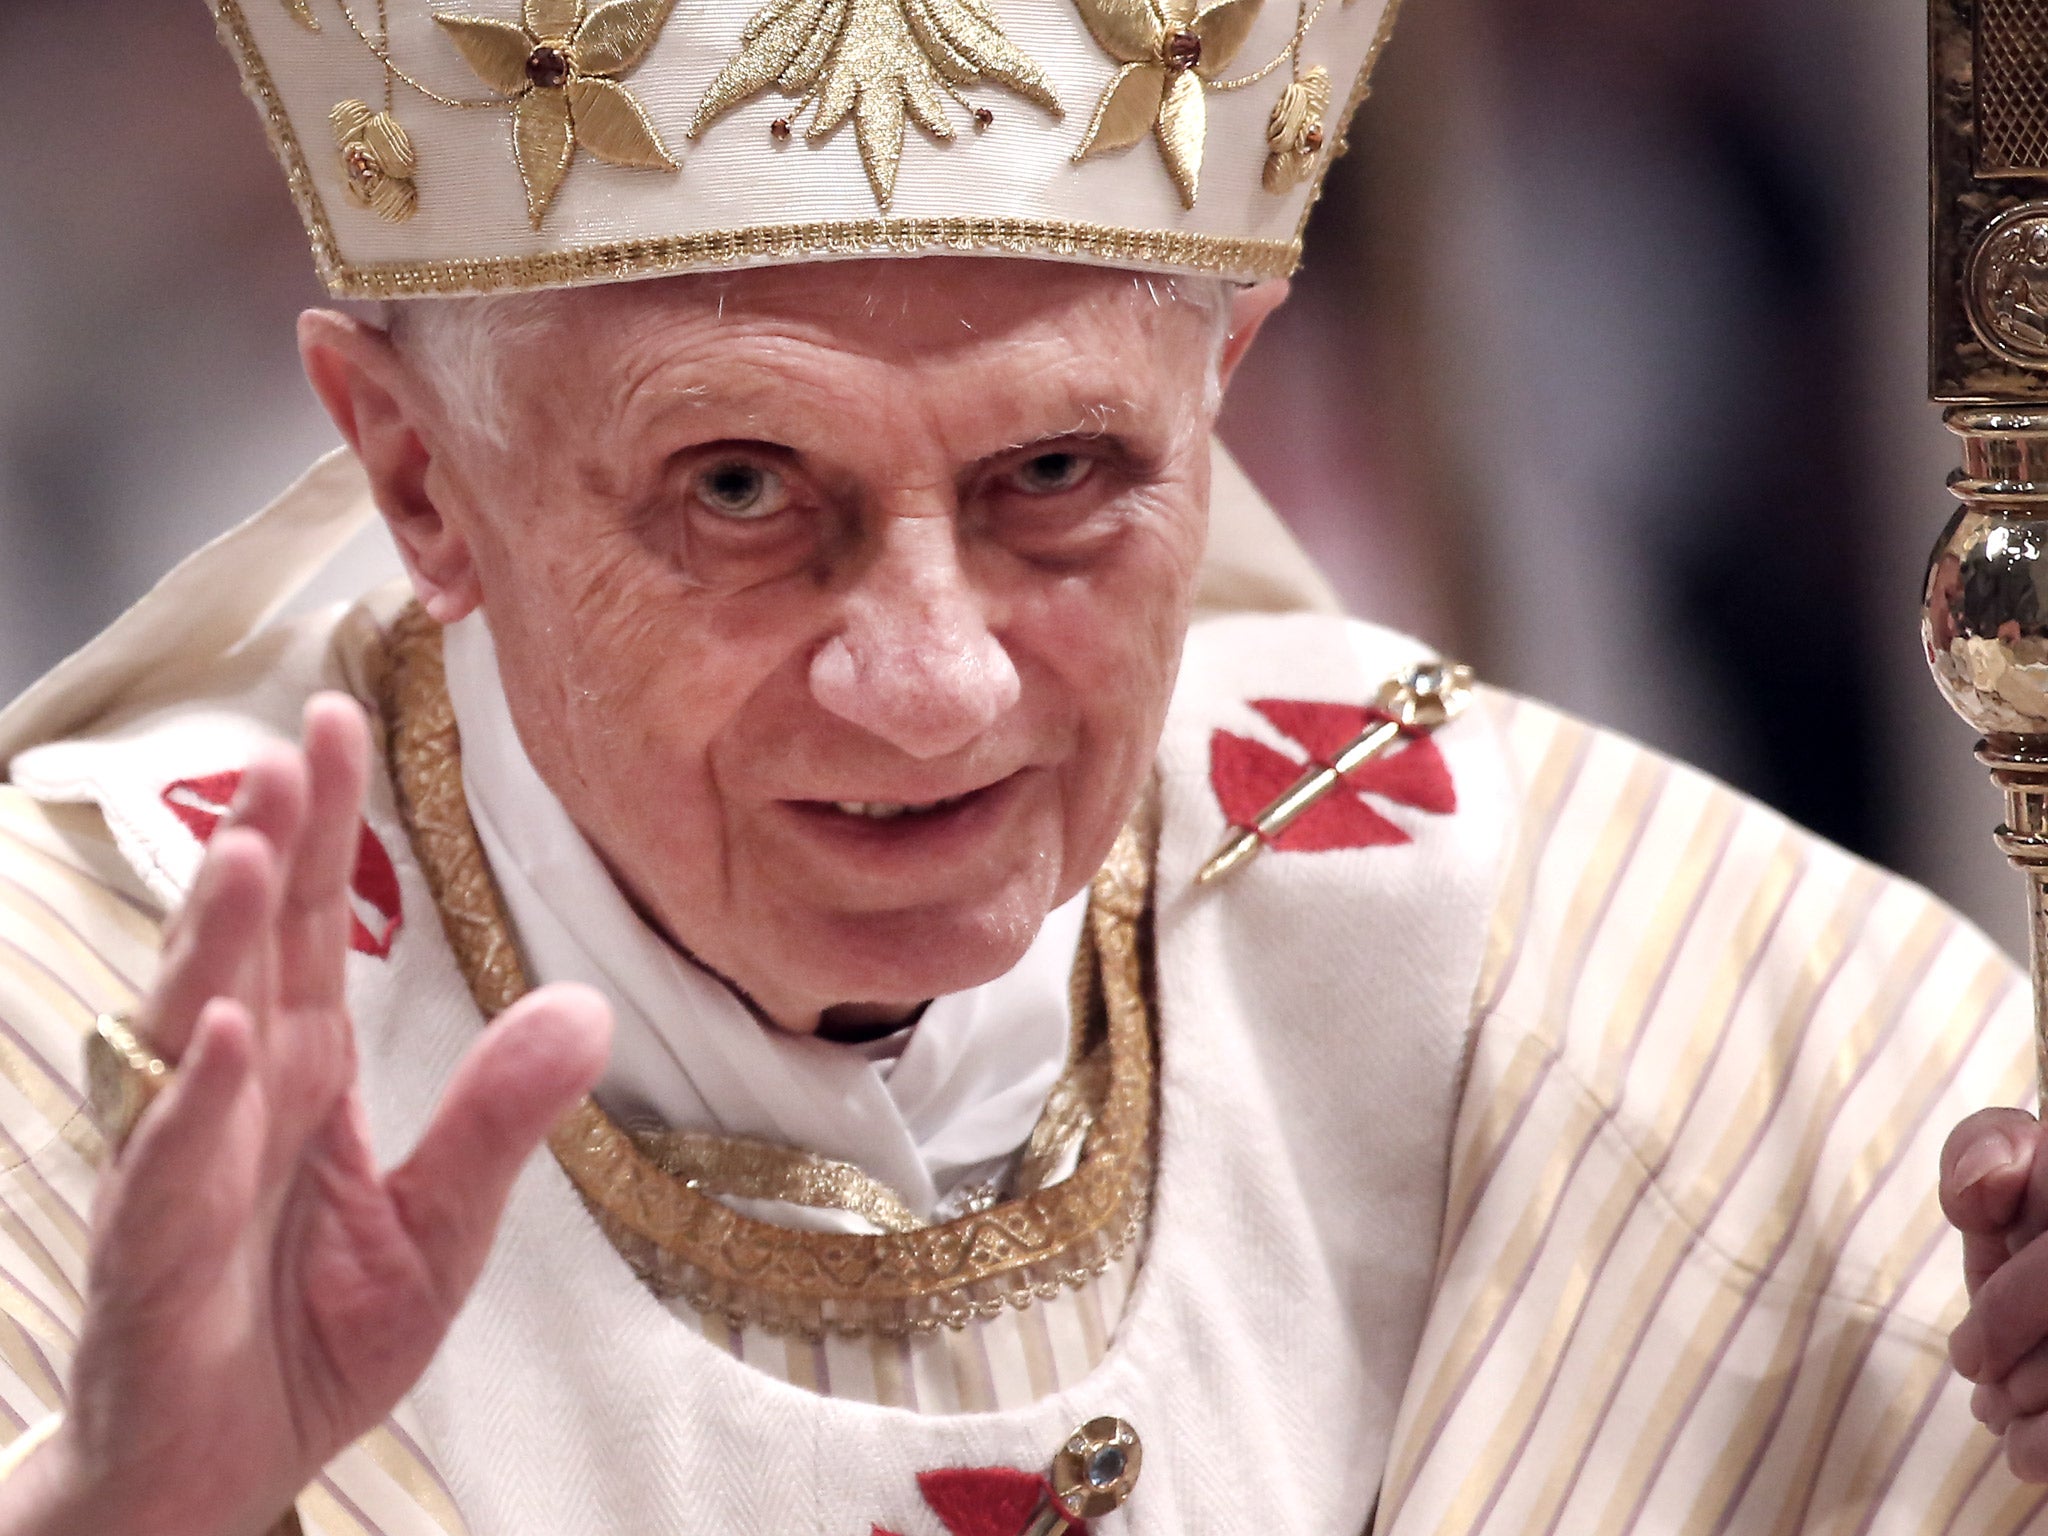 The Pope had the pacemaker procedure less than three months ago